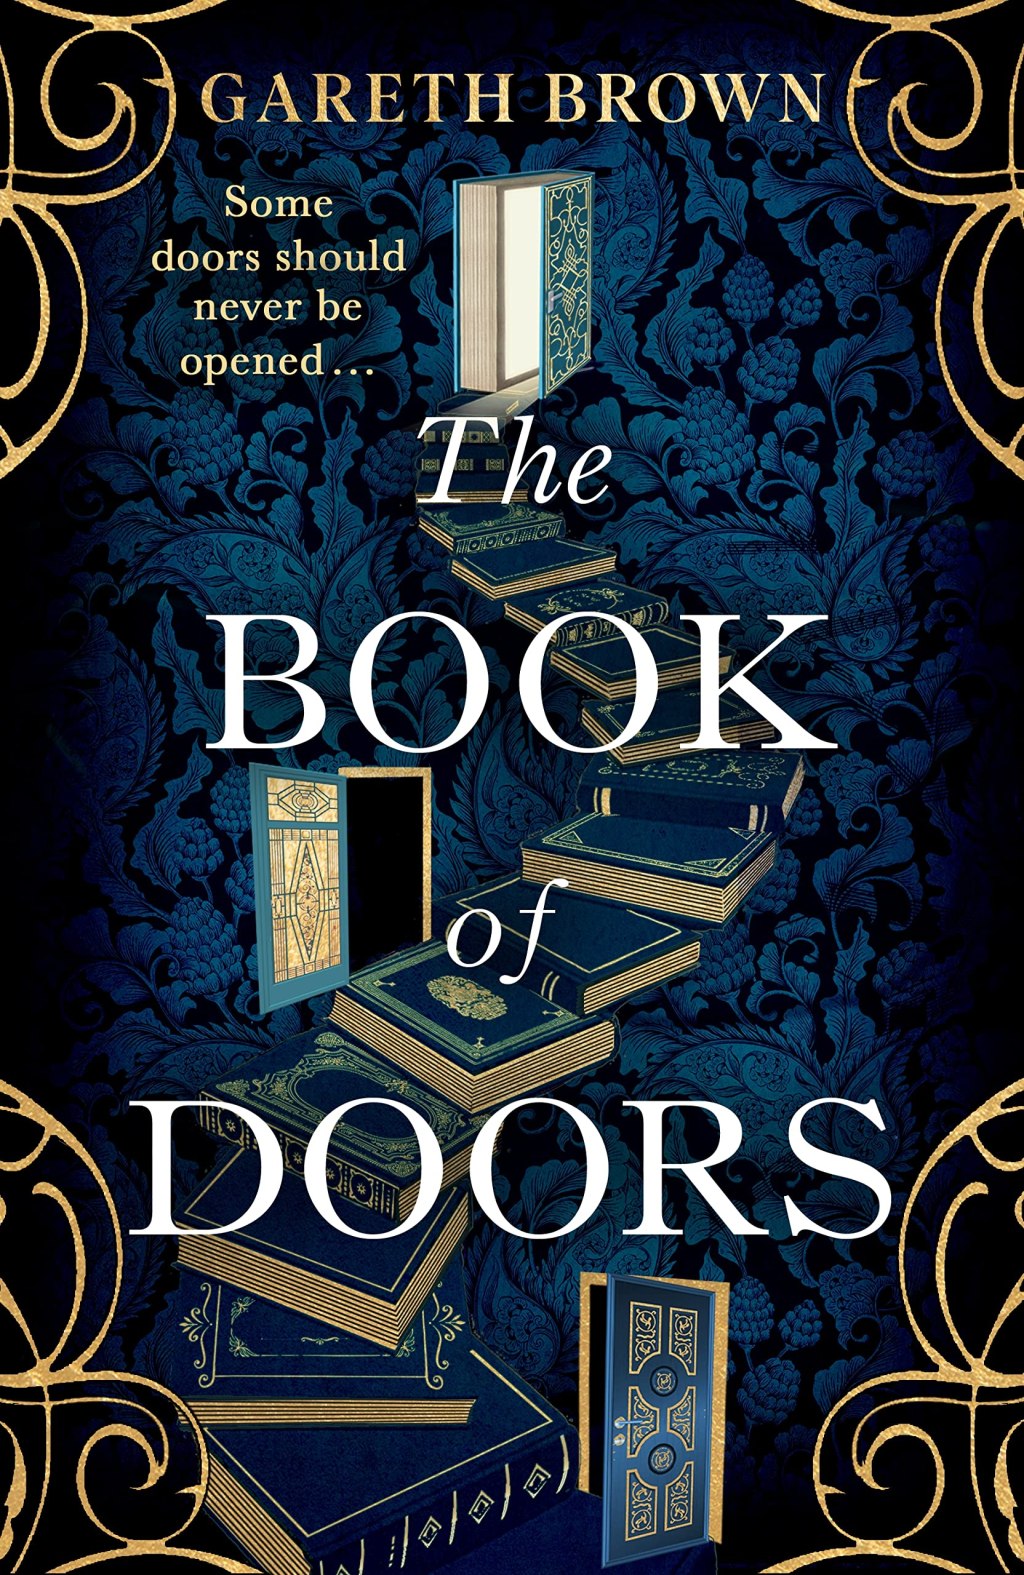 “The Book of Doors” by Gareth Brown